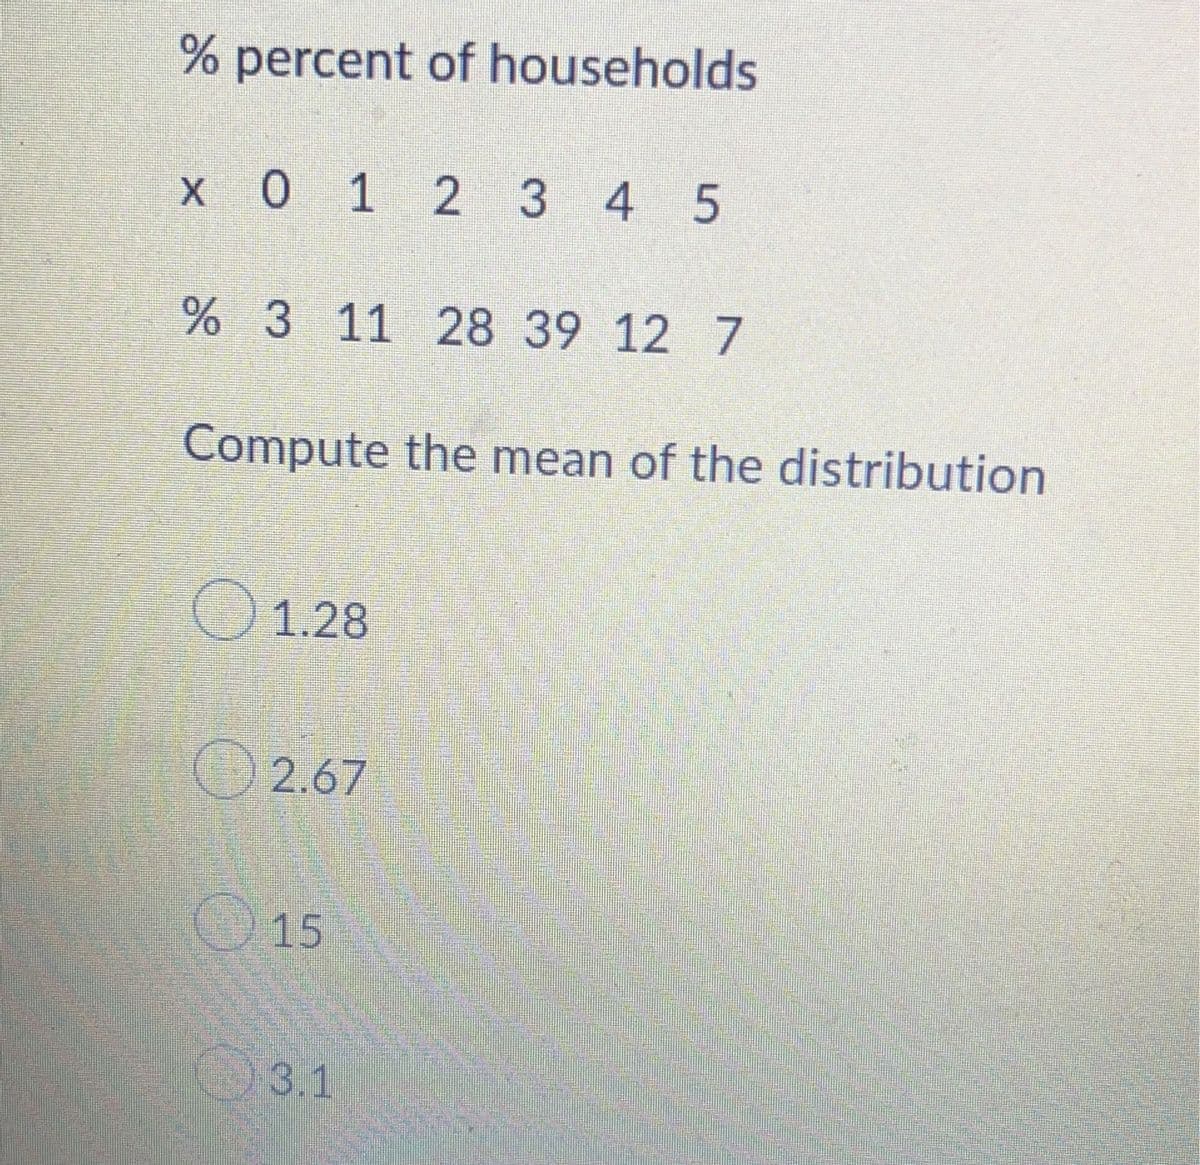 % percent of households
X 0 1 2 3 4 5
% 3 11 28 39 12 7
Compute the mean of the distribution
1.28
2.67
15
3.1